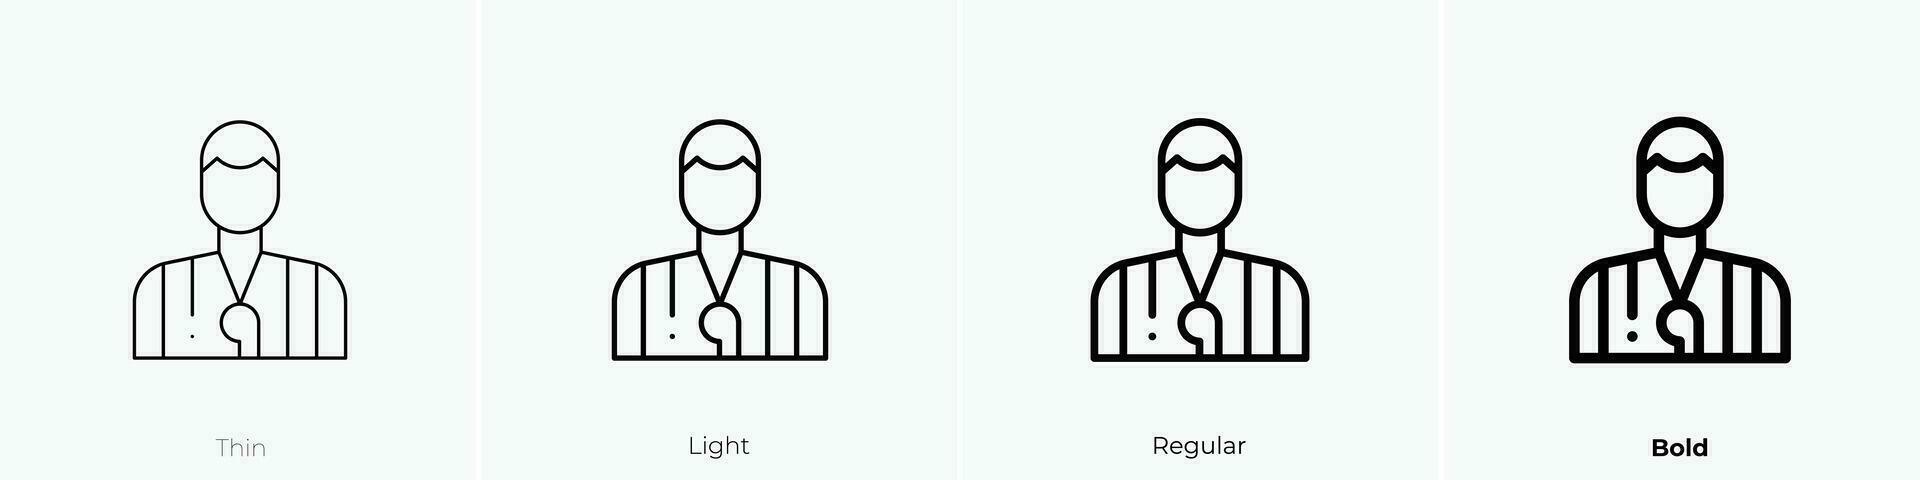 referee icon. Thin, Light, Regular And Bold style design isolated on white background vector